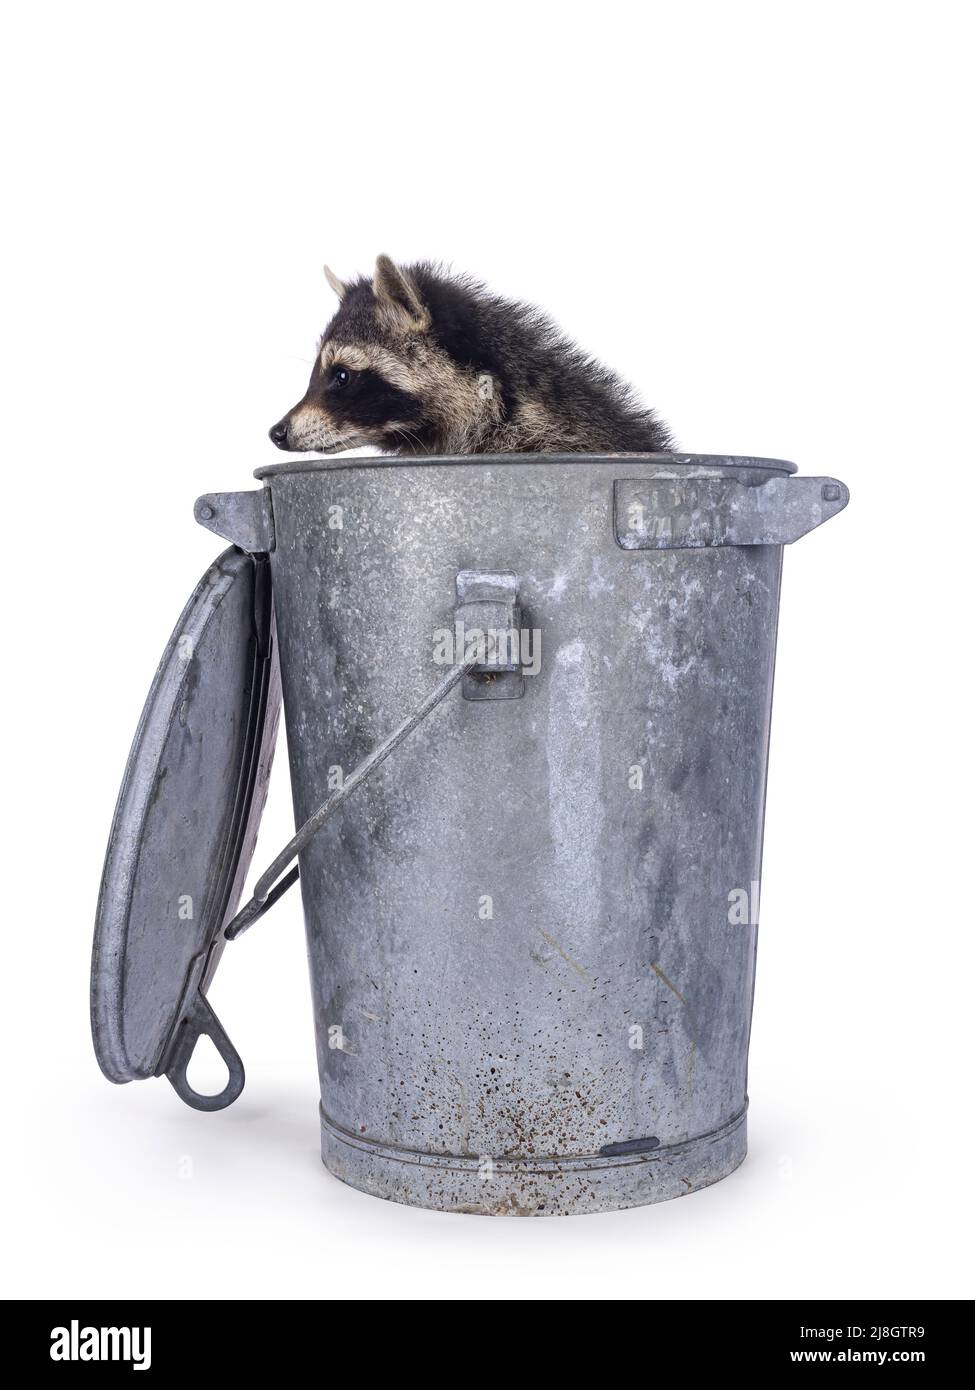 Raccoon sitting in trash can. Looking to the side away from camera. Isolated on a white background. Stock Photo